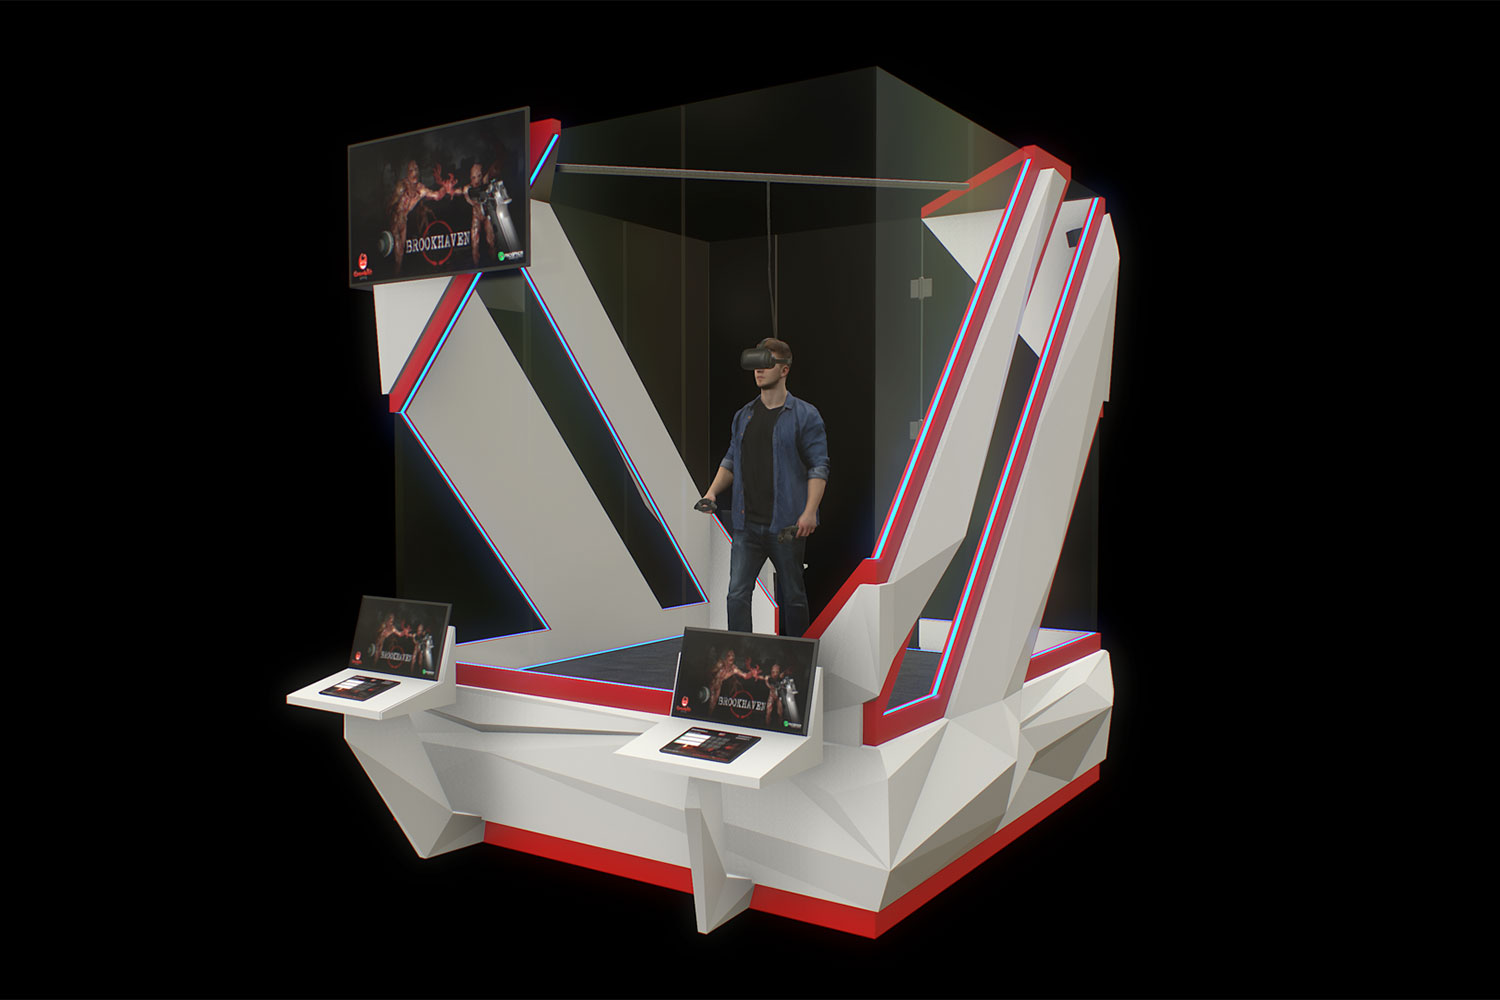 climb into this glass box in a vegas casino to play vr games for cash bets gamblit 3